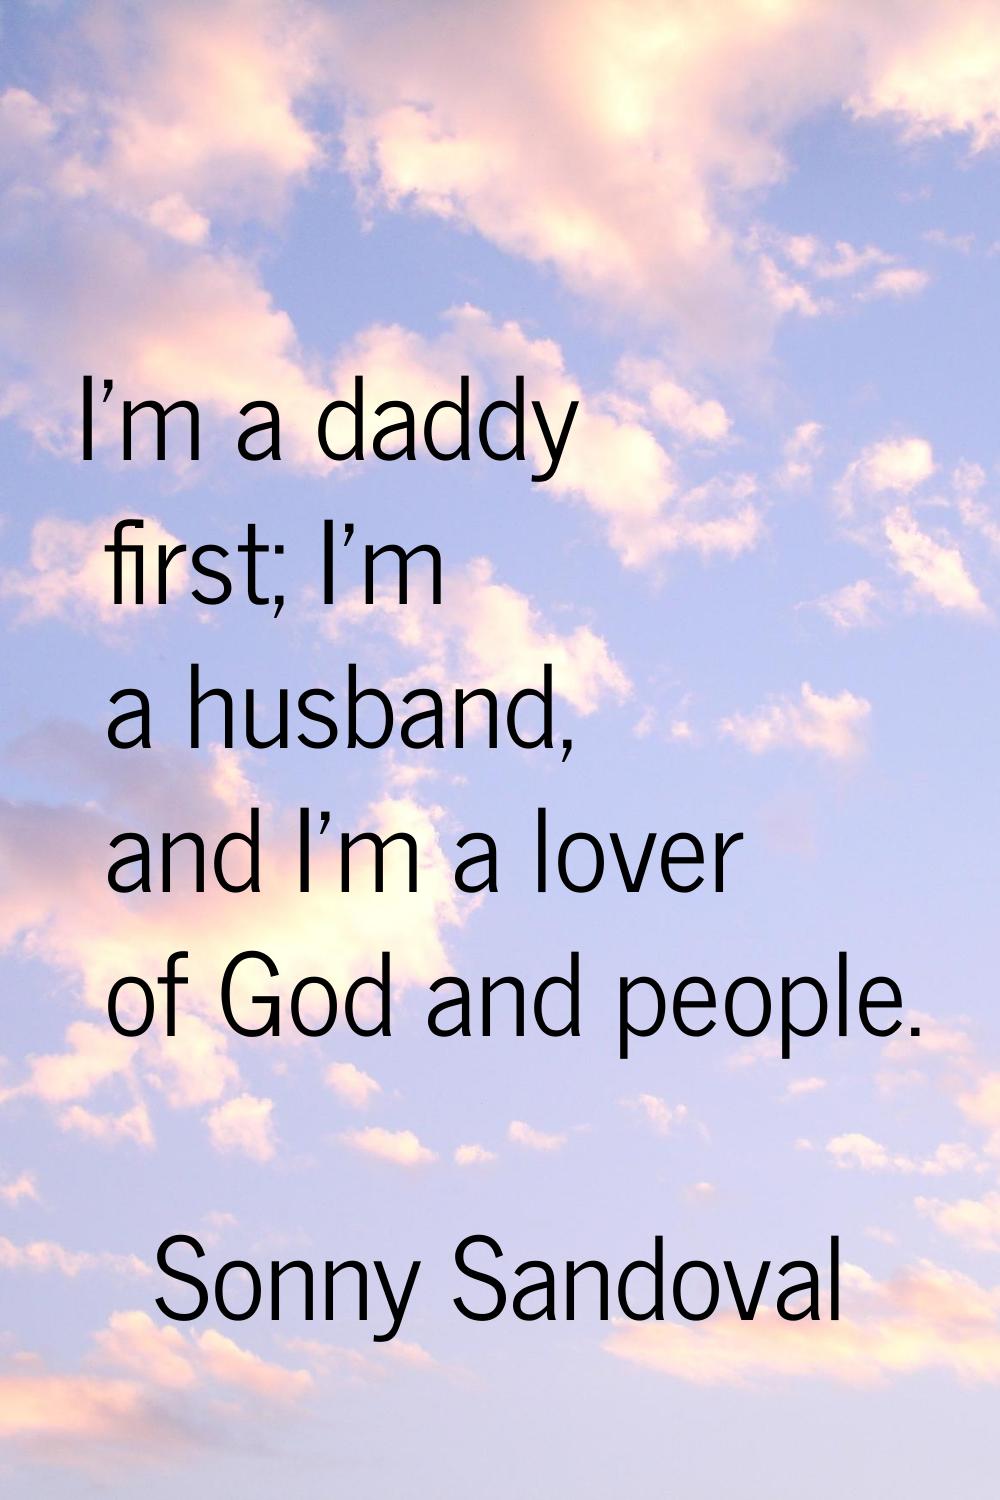 I'm a daddy first; I'm a husband, and I'm a lover of God and people.